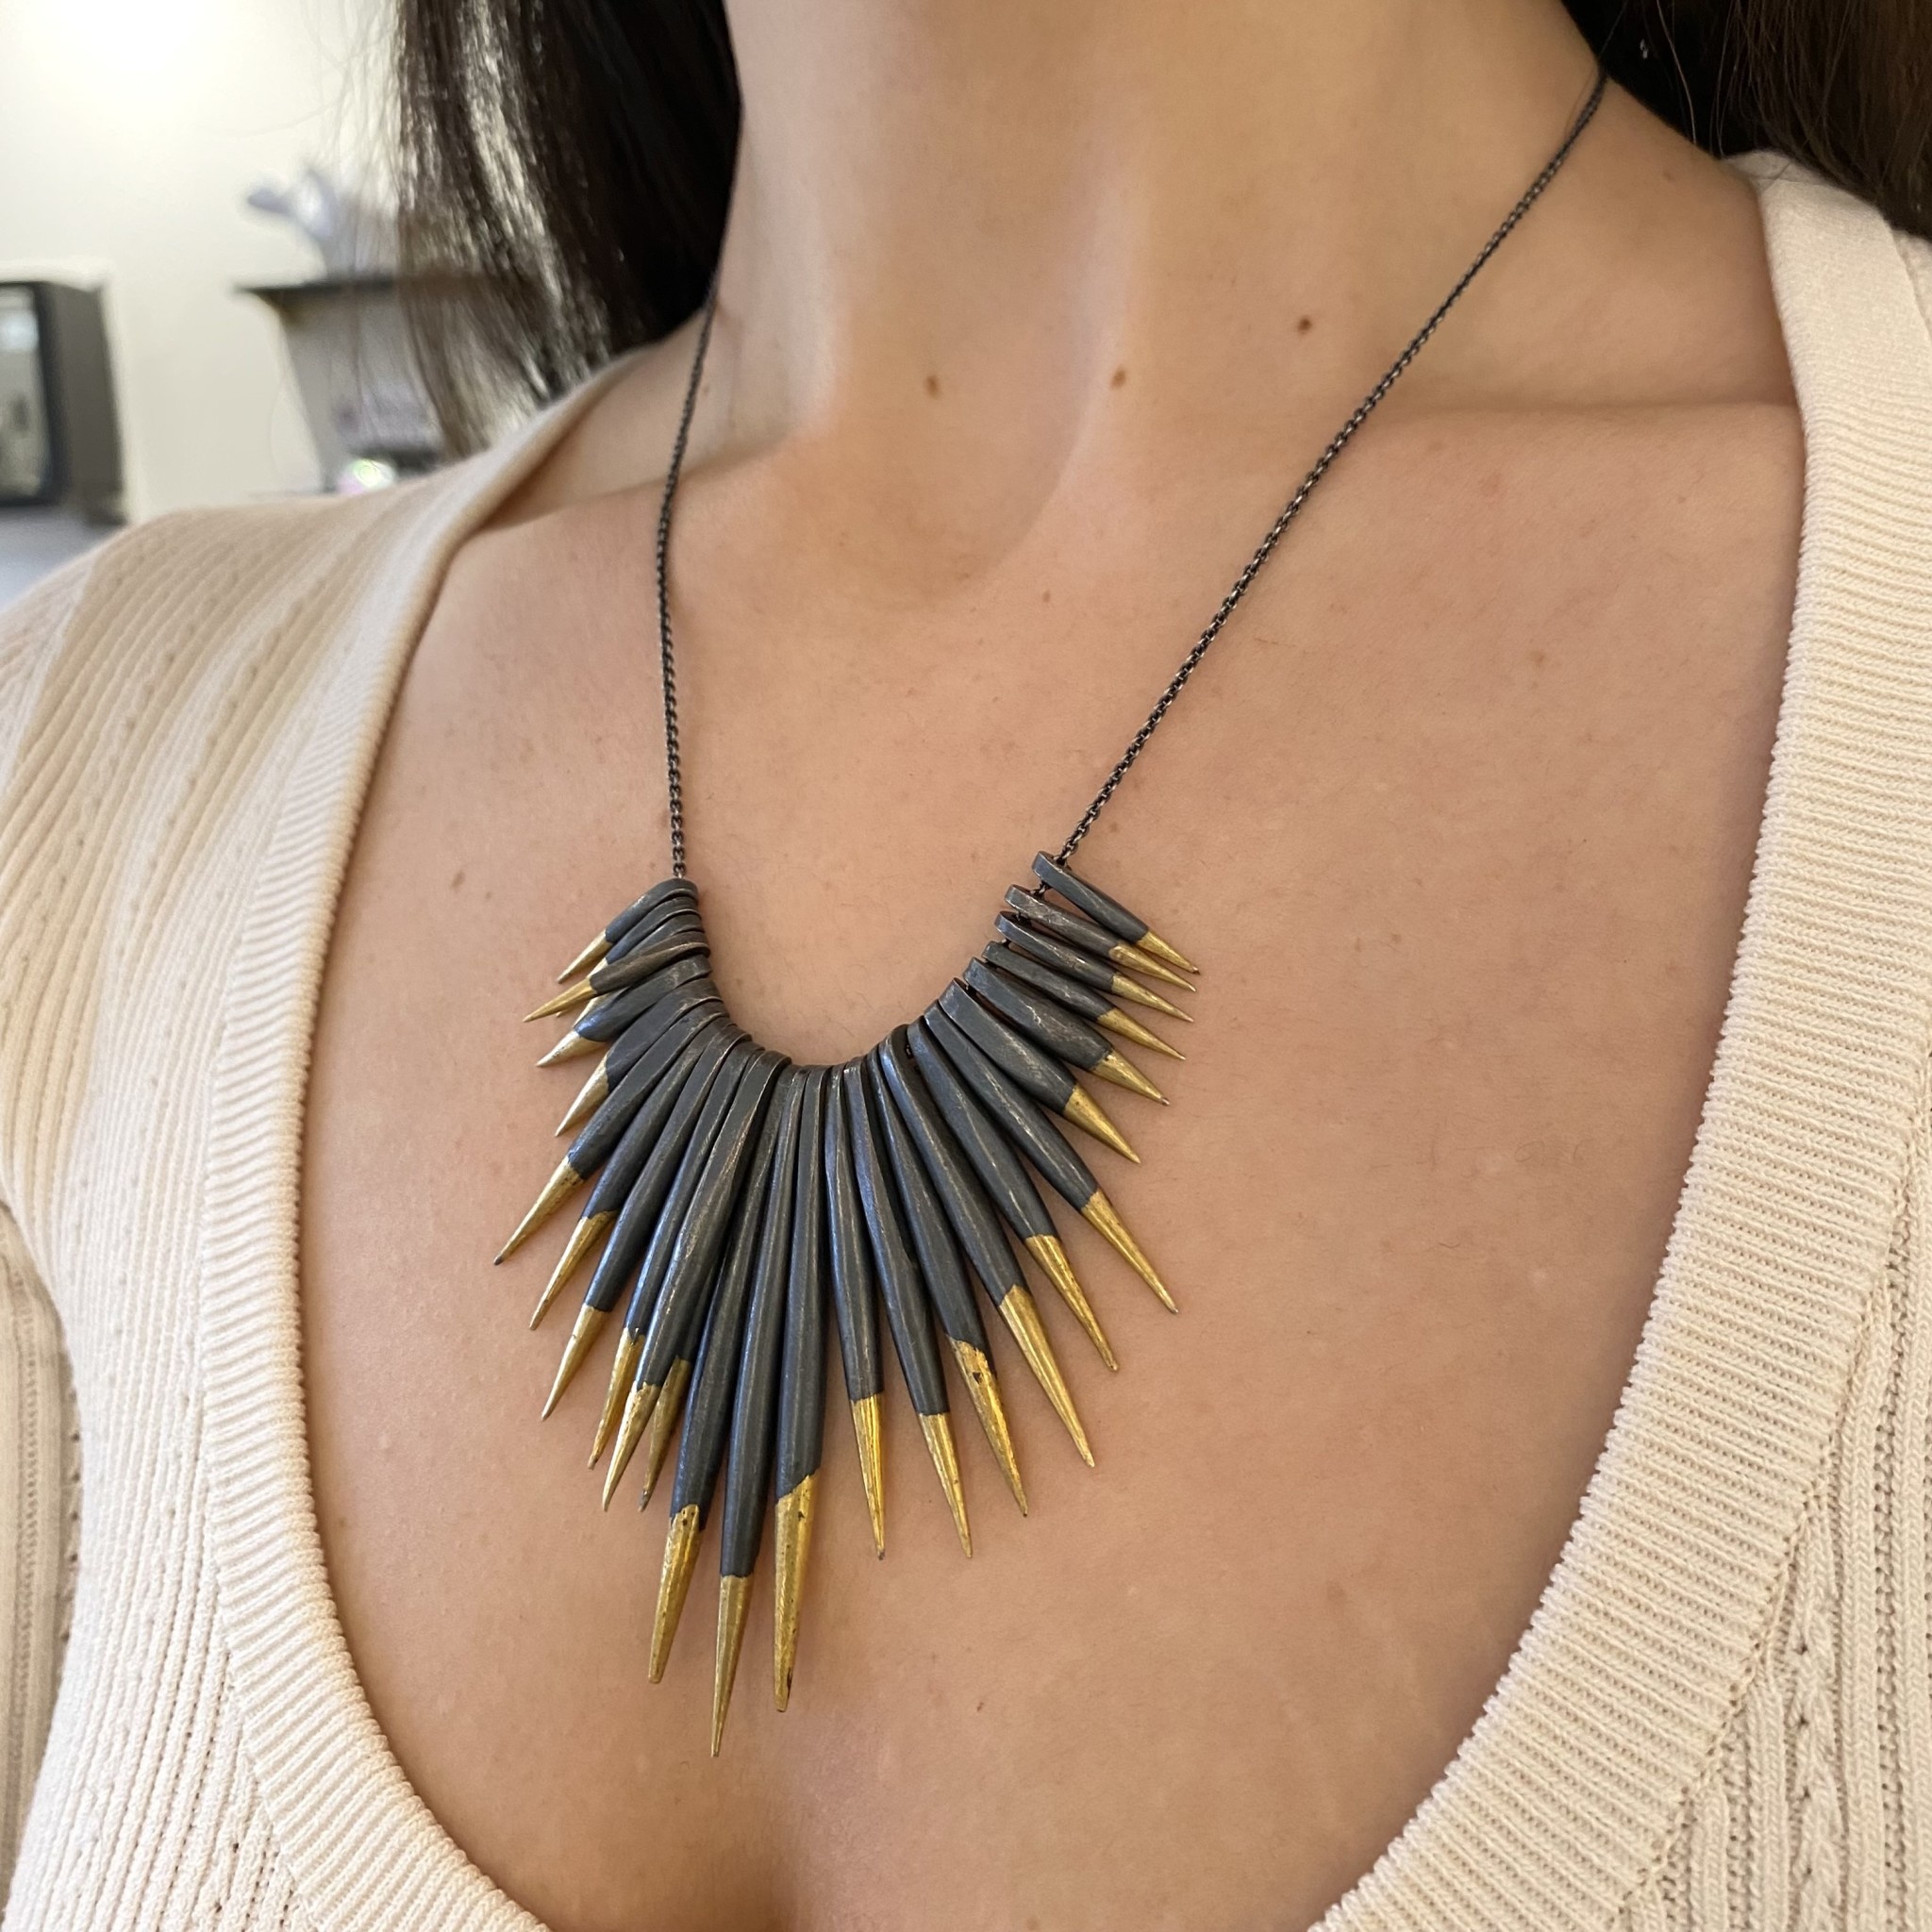 Buy Porcupine Quill Necklace, Vintage African Handmade Jewelry, Glass  Beads, Bib Necklace Online in India - Etsy